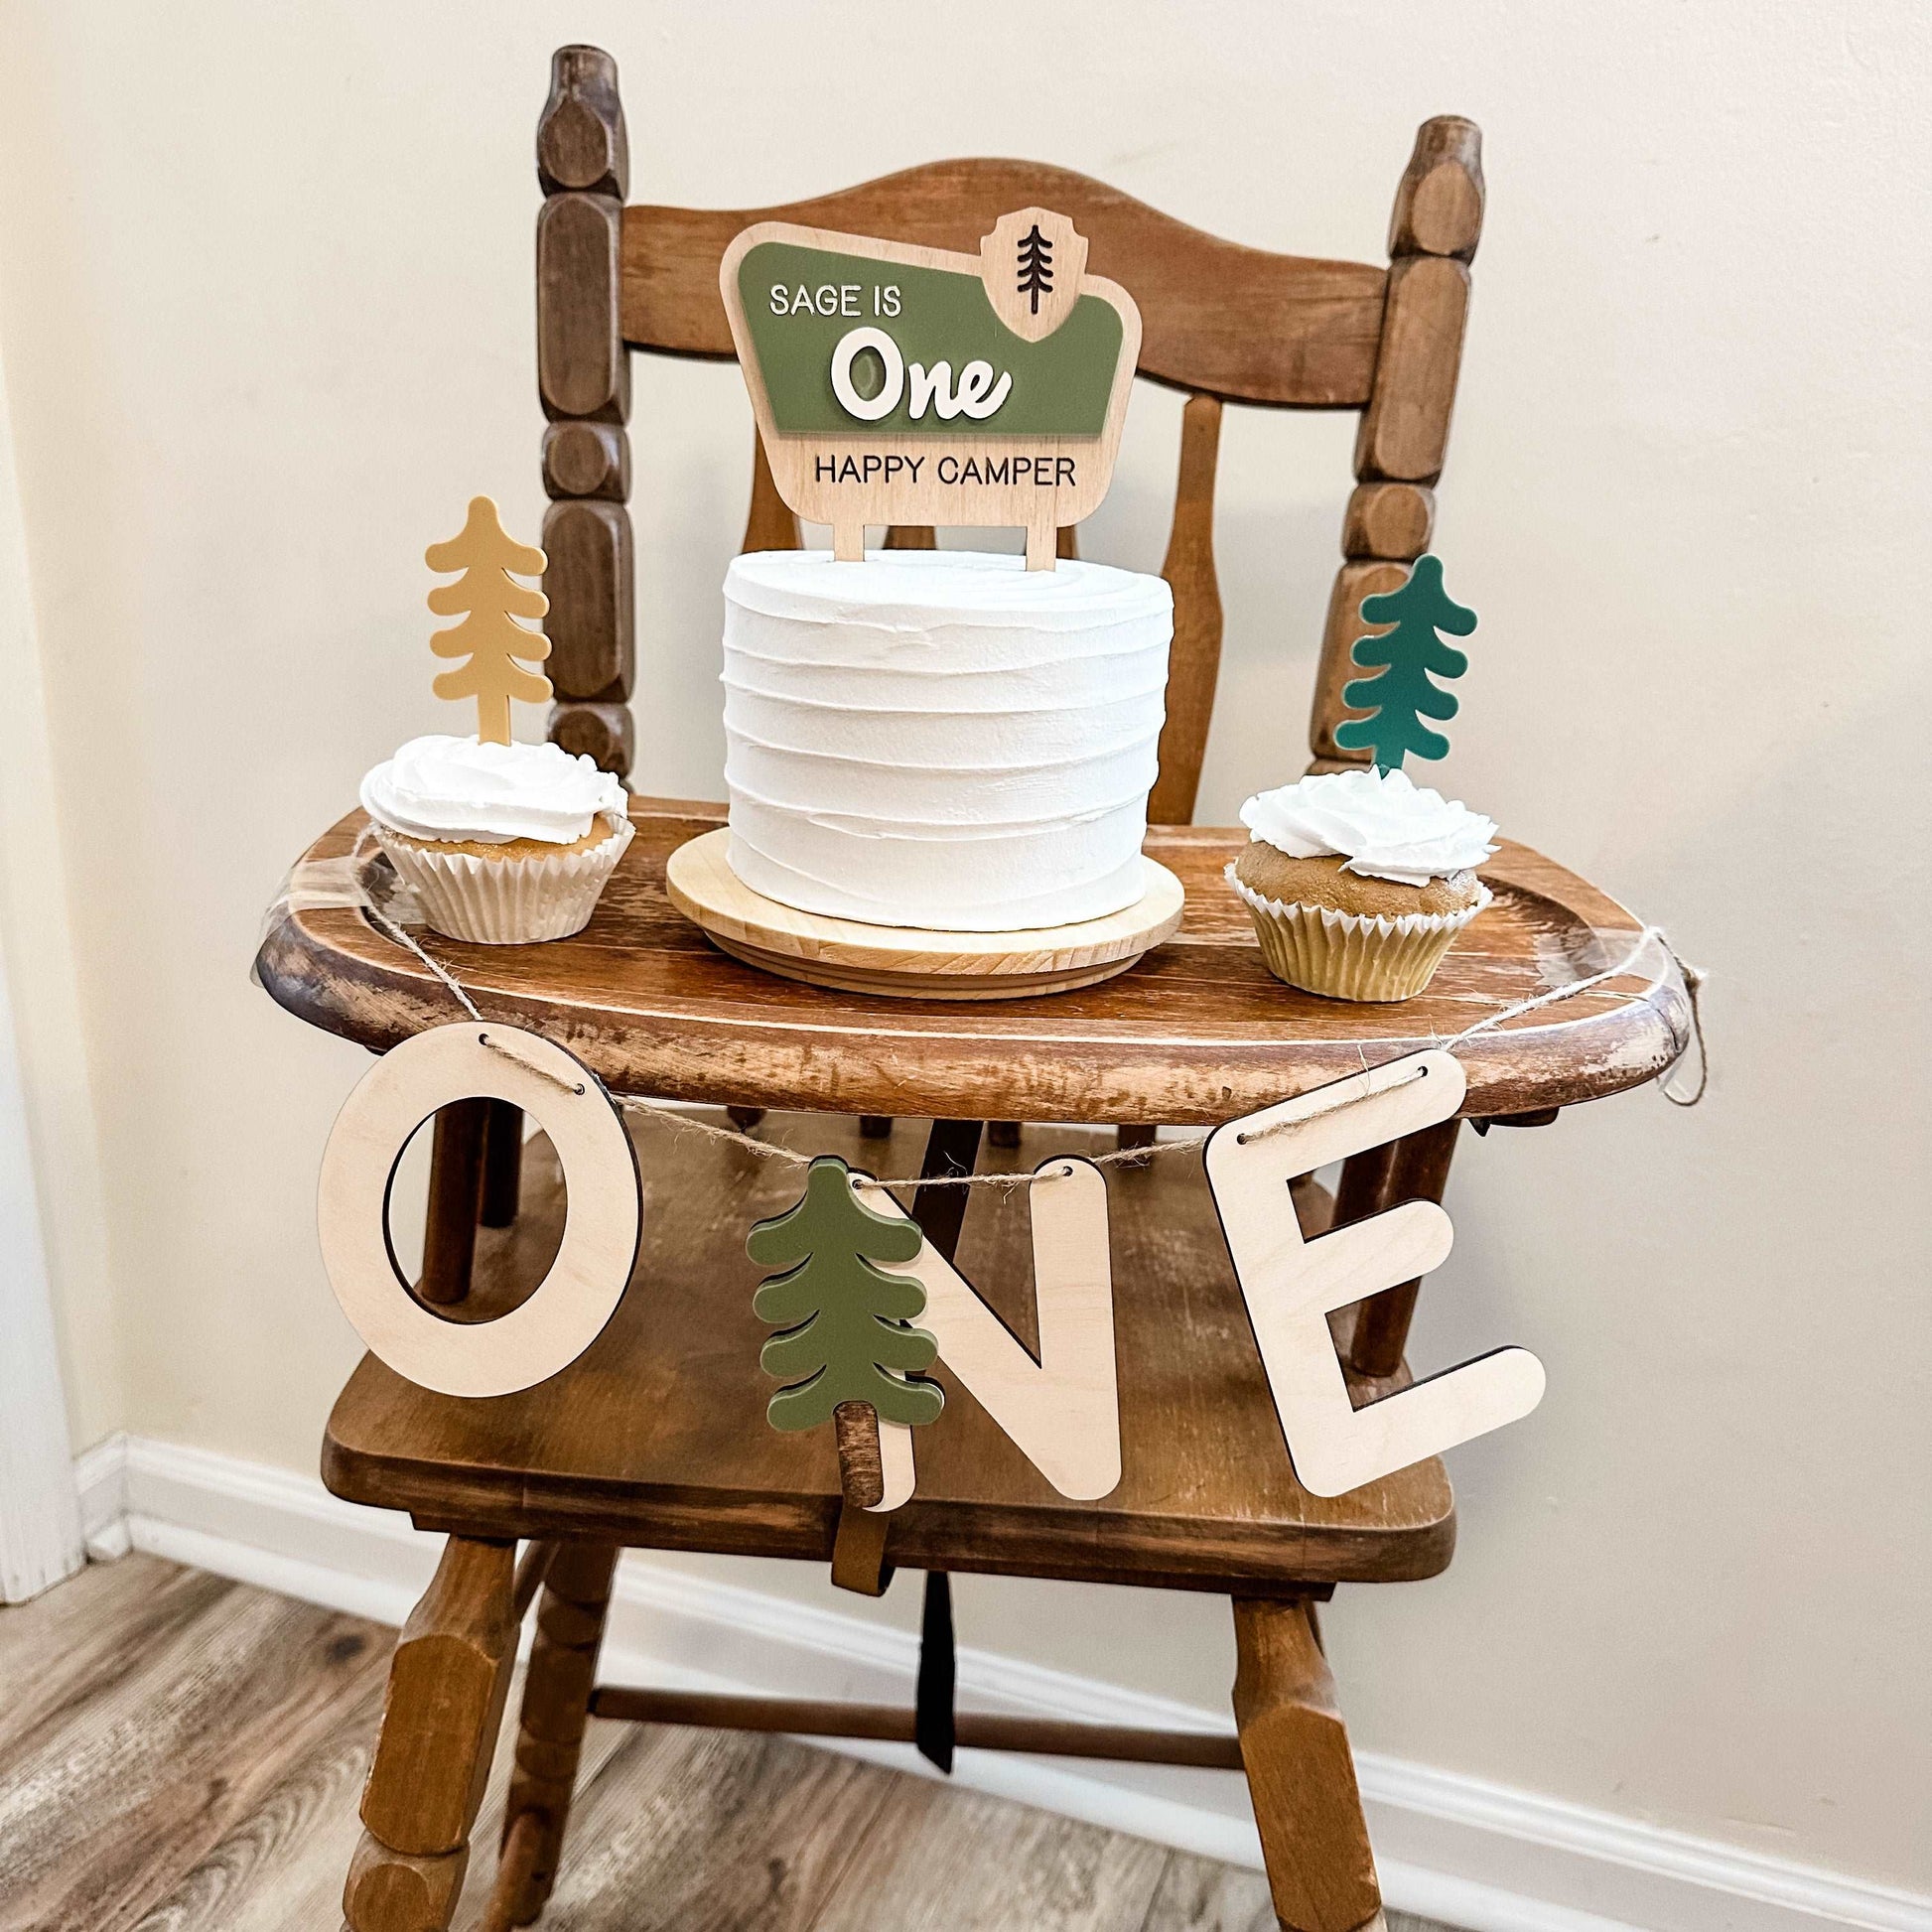 One Happy Camper High Chair Banner - Hartwood Design